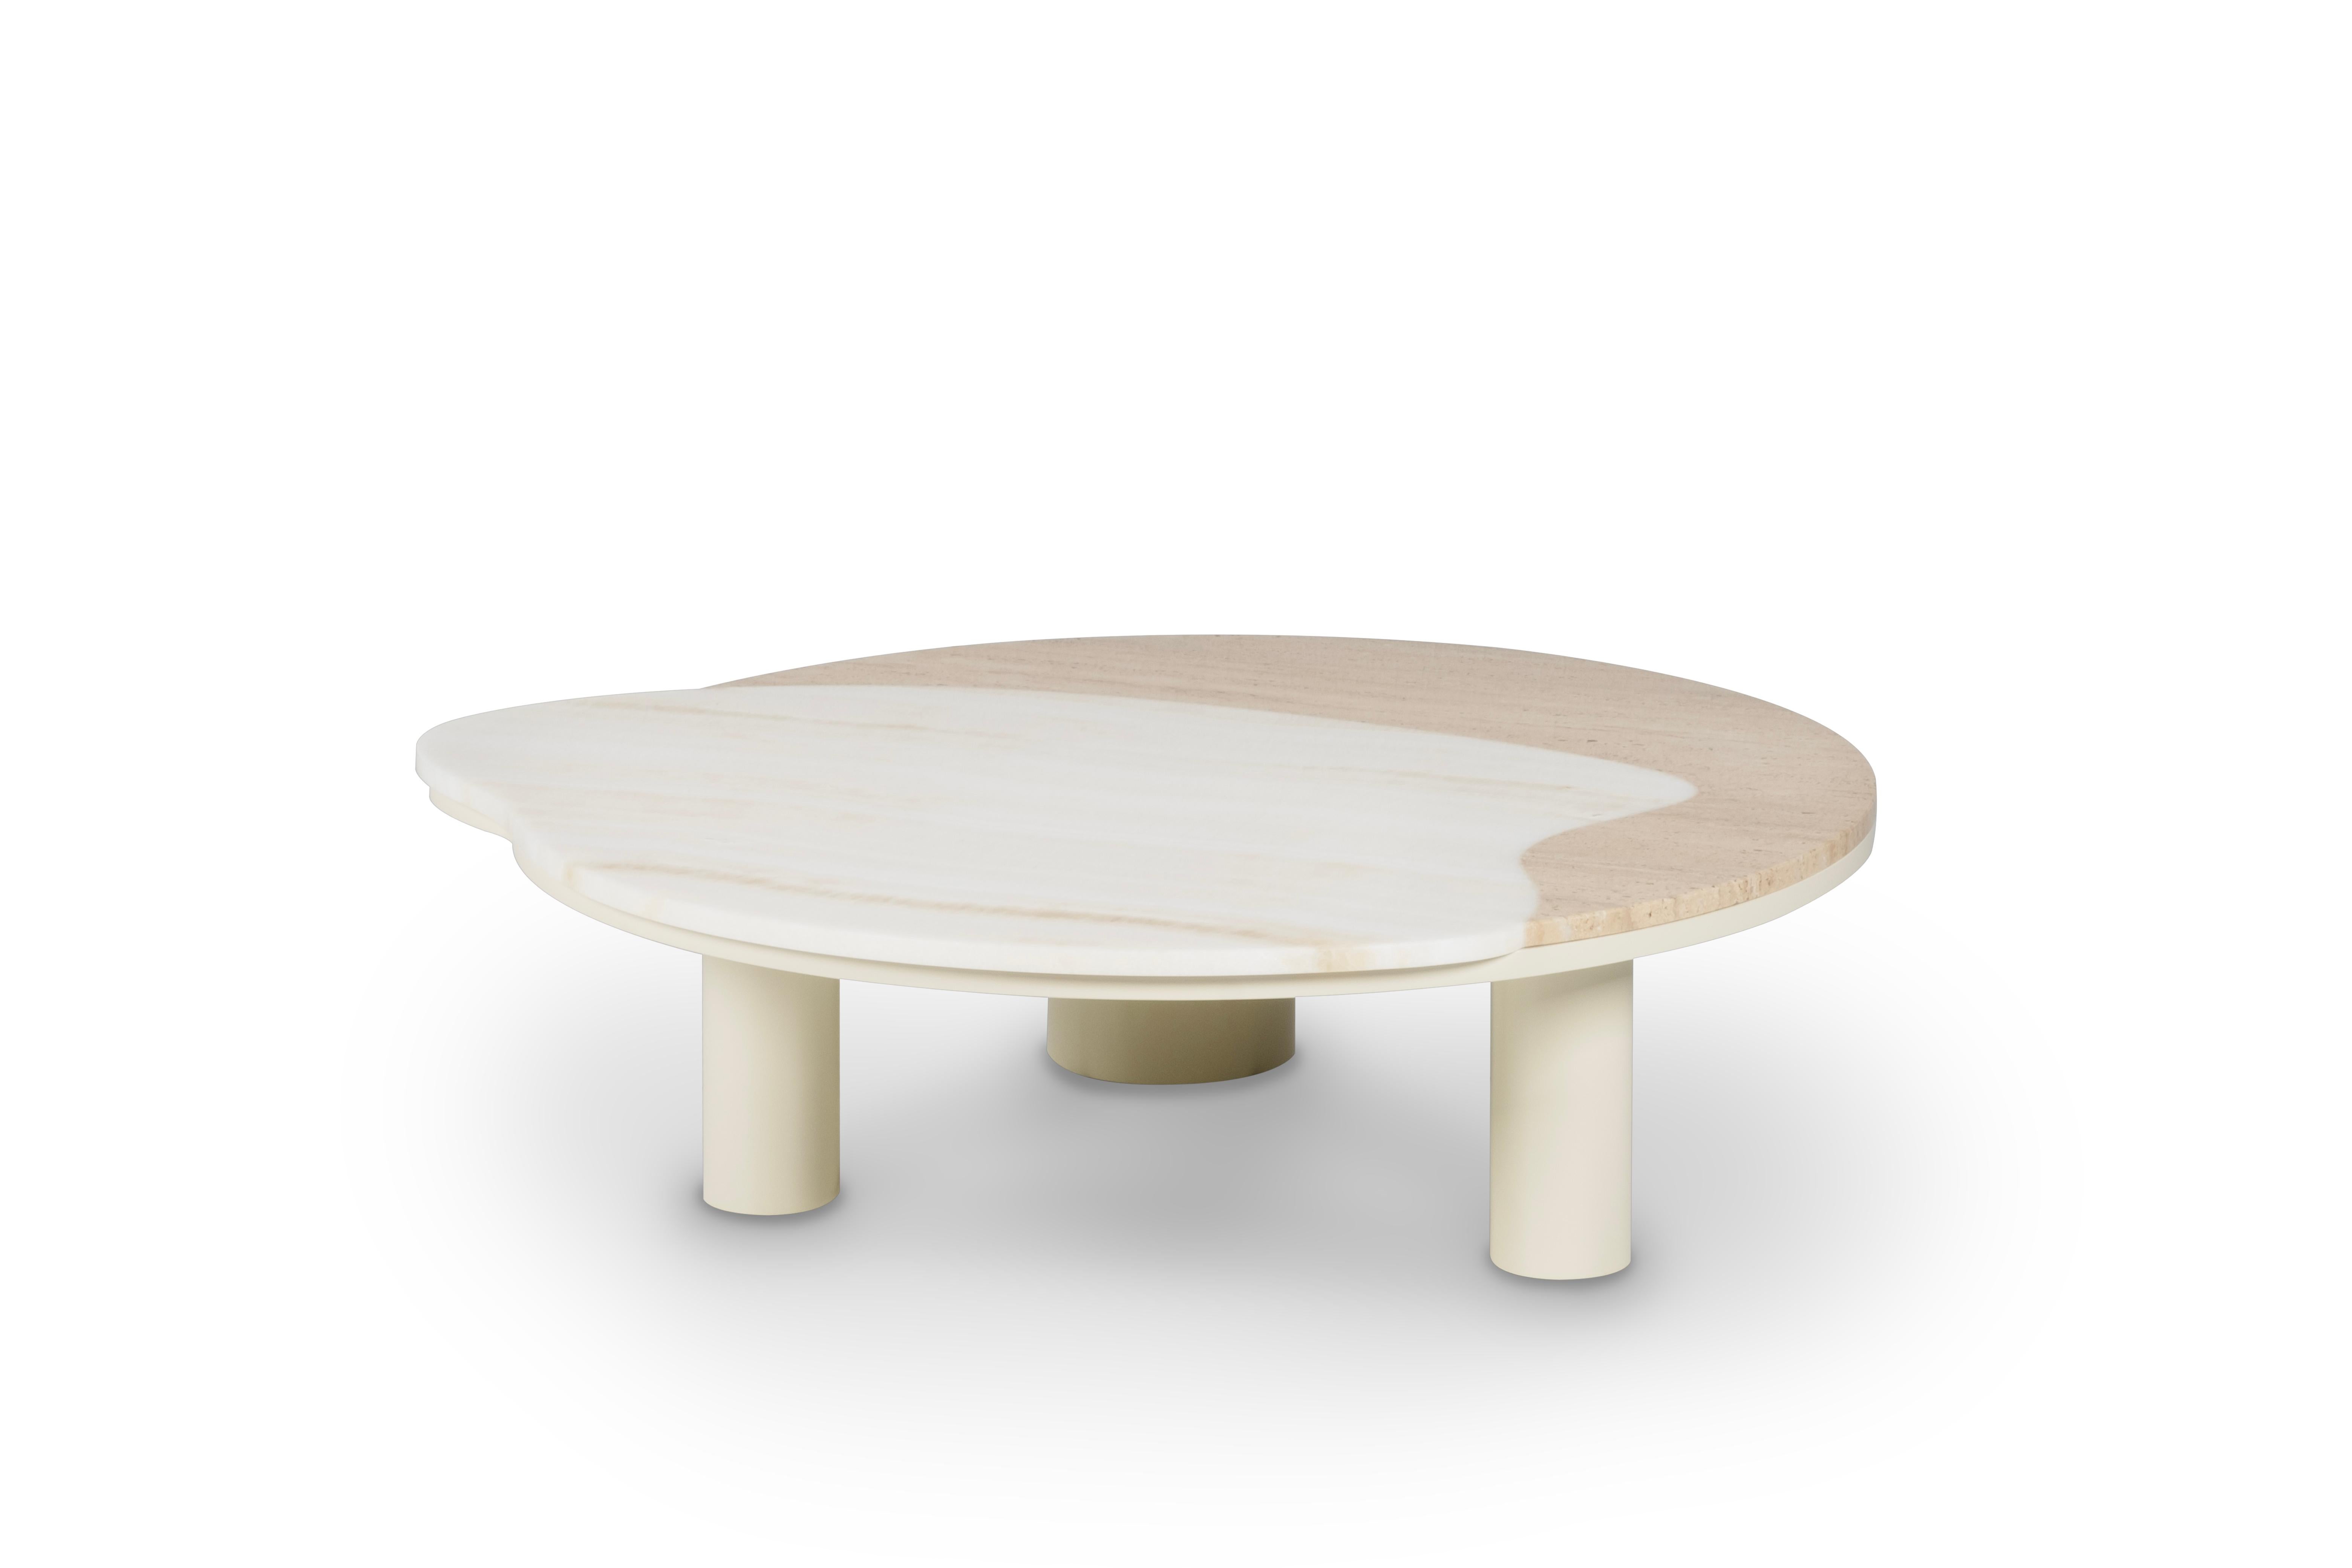 Bordeira coffee table, Contemporary Collection, handcrafted in Portugal - Europe by Greenapple.

Designed by Rute Martins for the Contemporary Collection, the Bordeira modern coffee table was designed to add the essence of nature into the interior